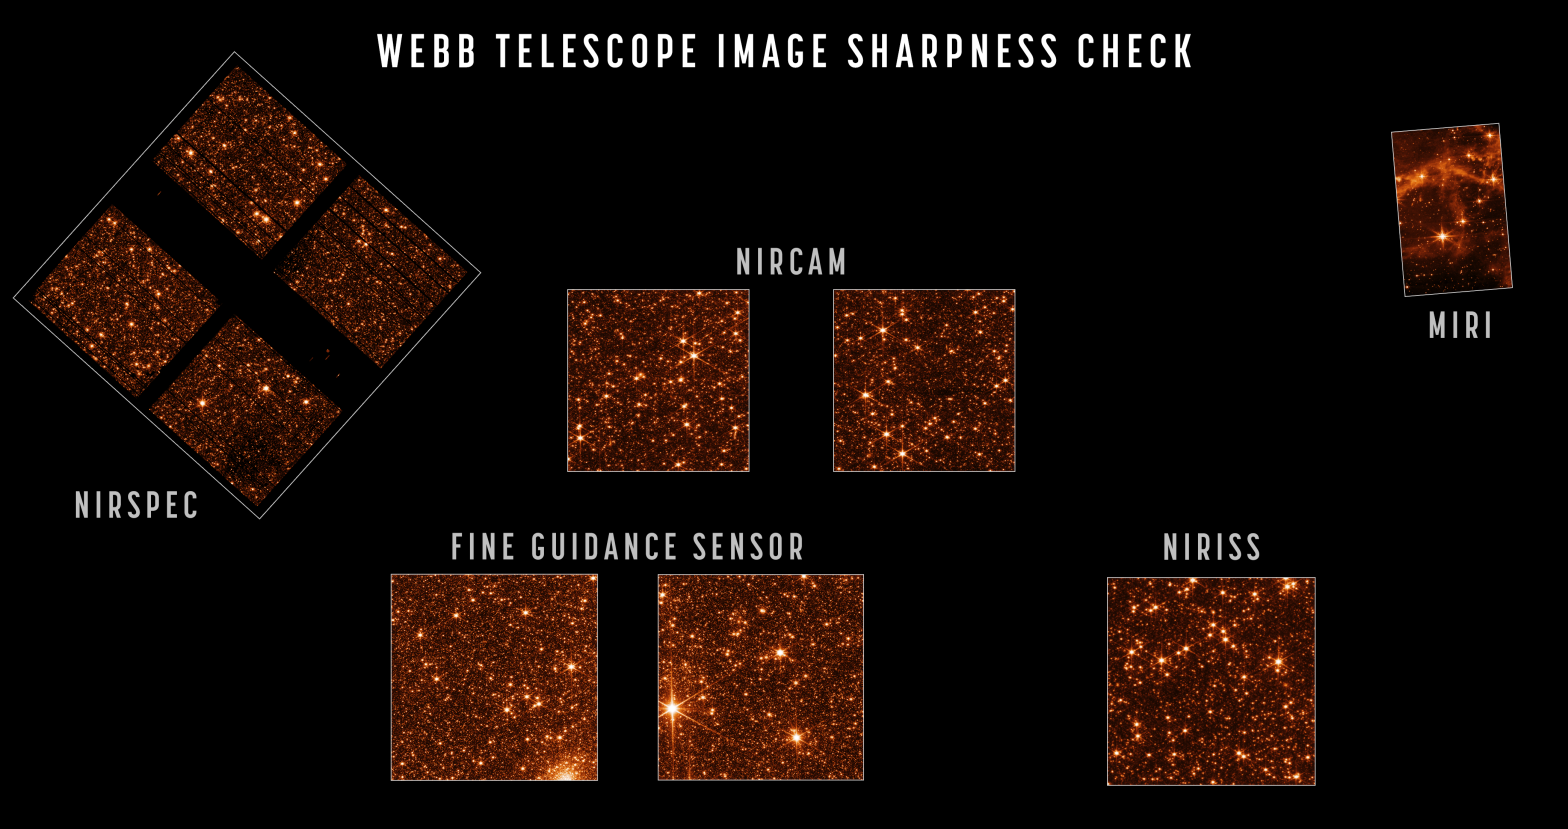 Images from the Webb Telescope's instrument suite of focused stars indicate that the mirrors are fully aligned. (Image: NASA/STScI)